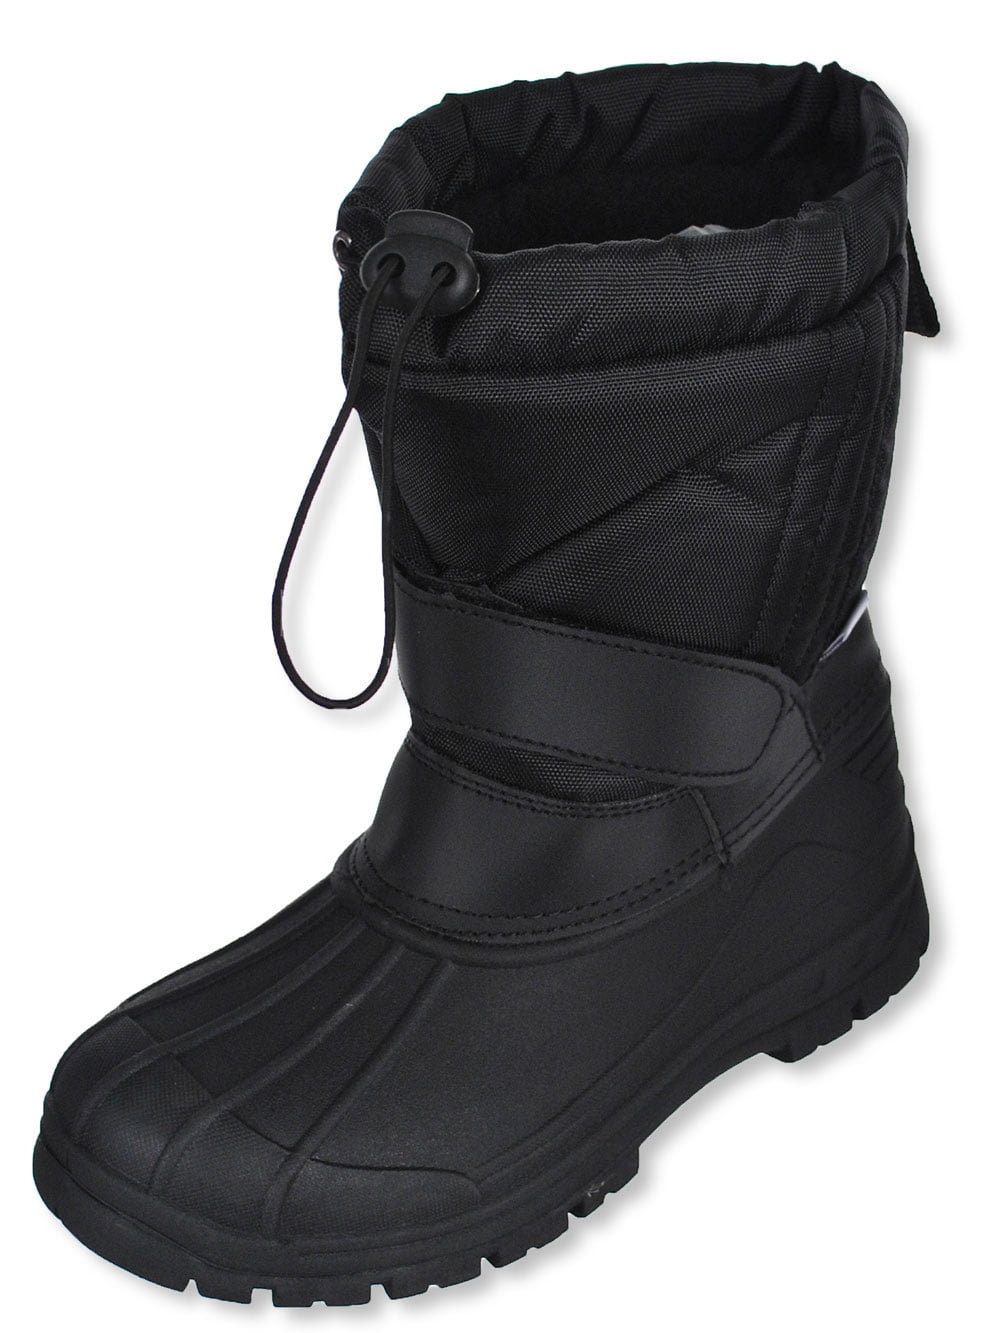 winter boots for kids boys